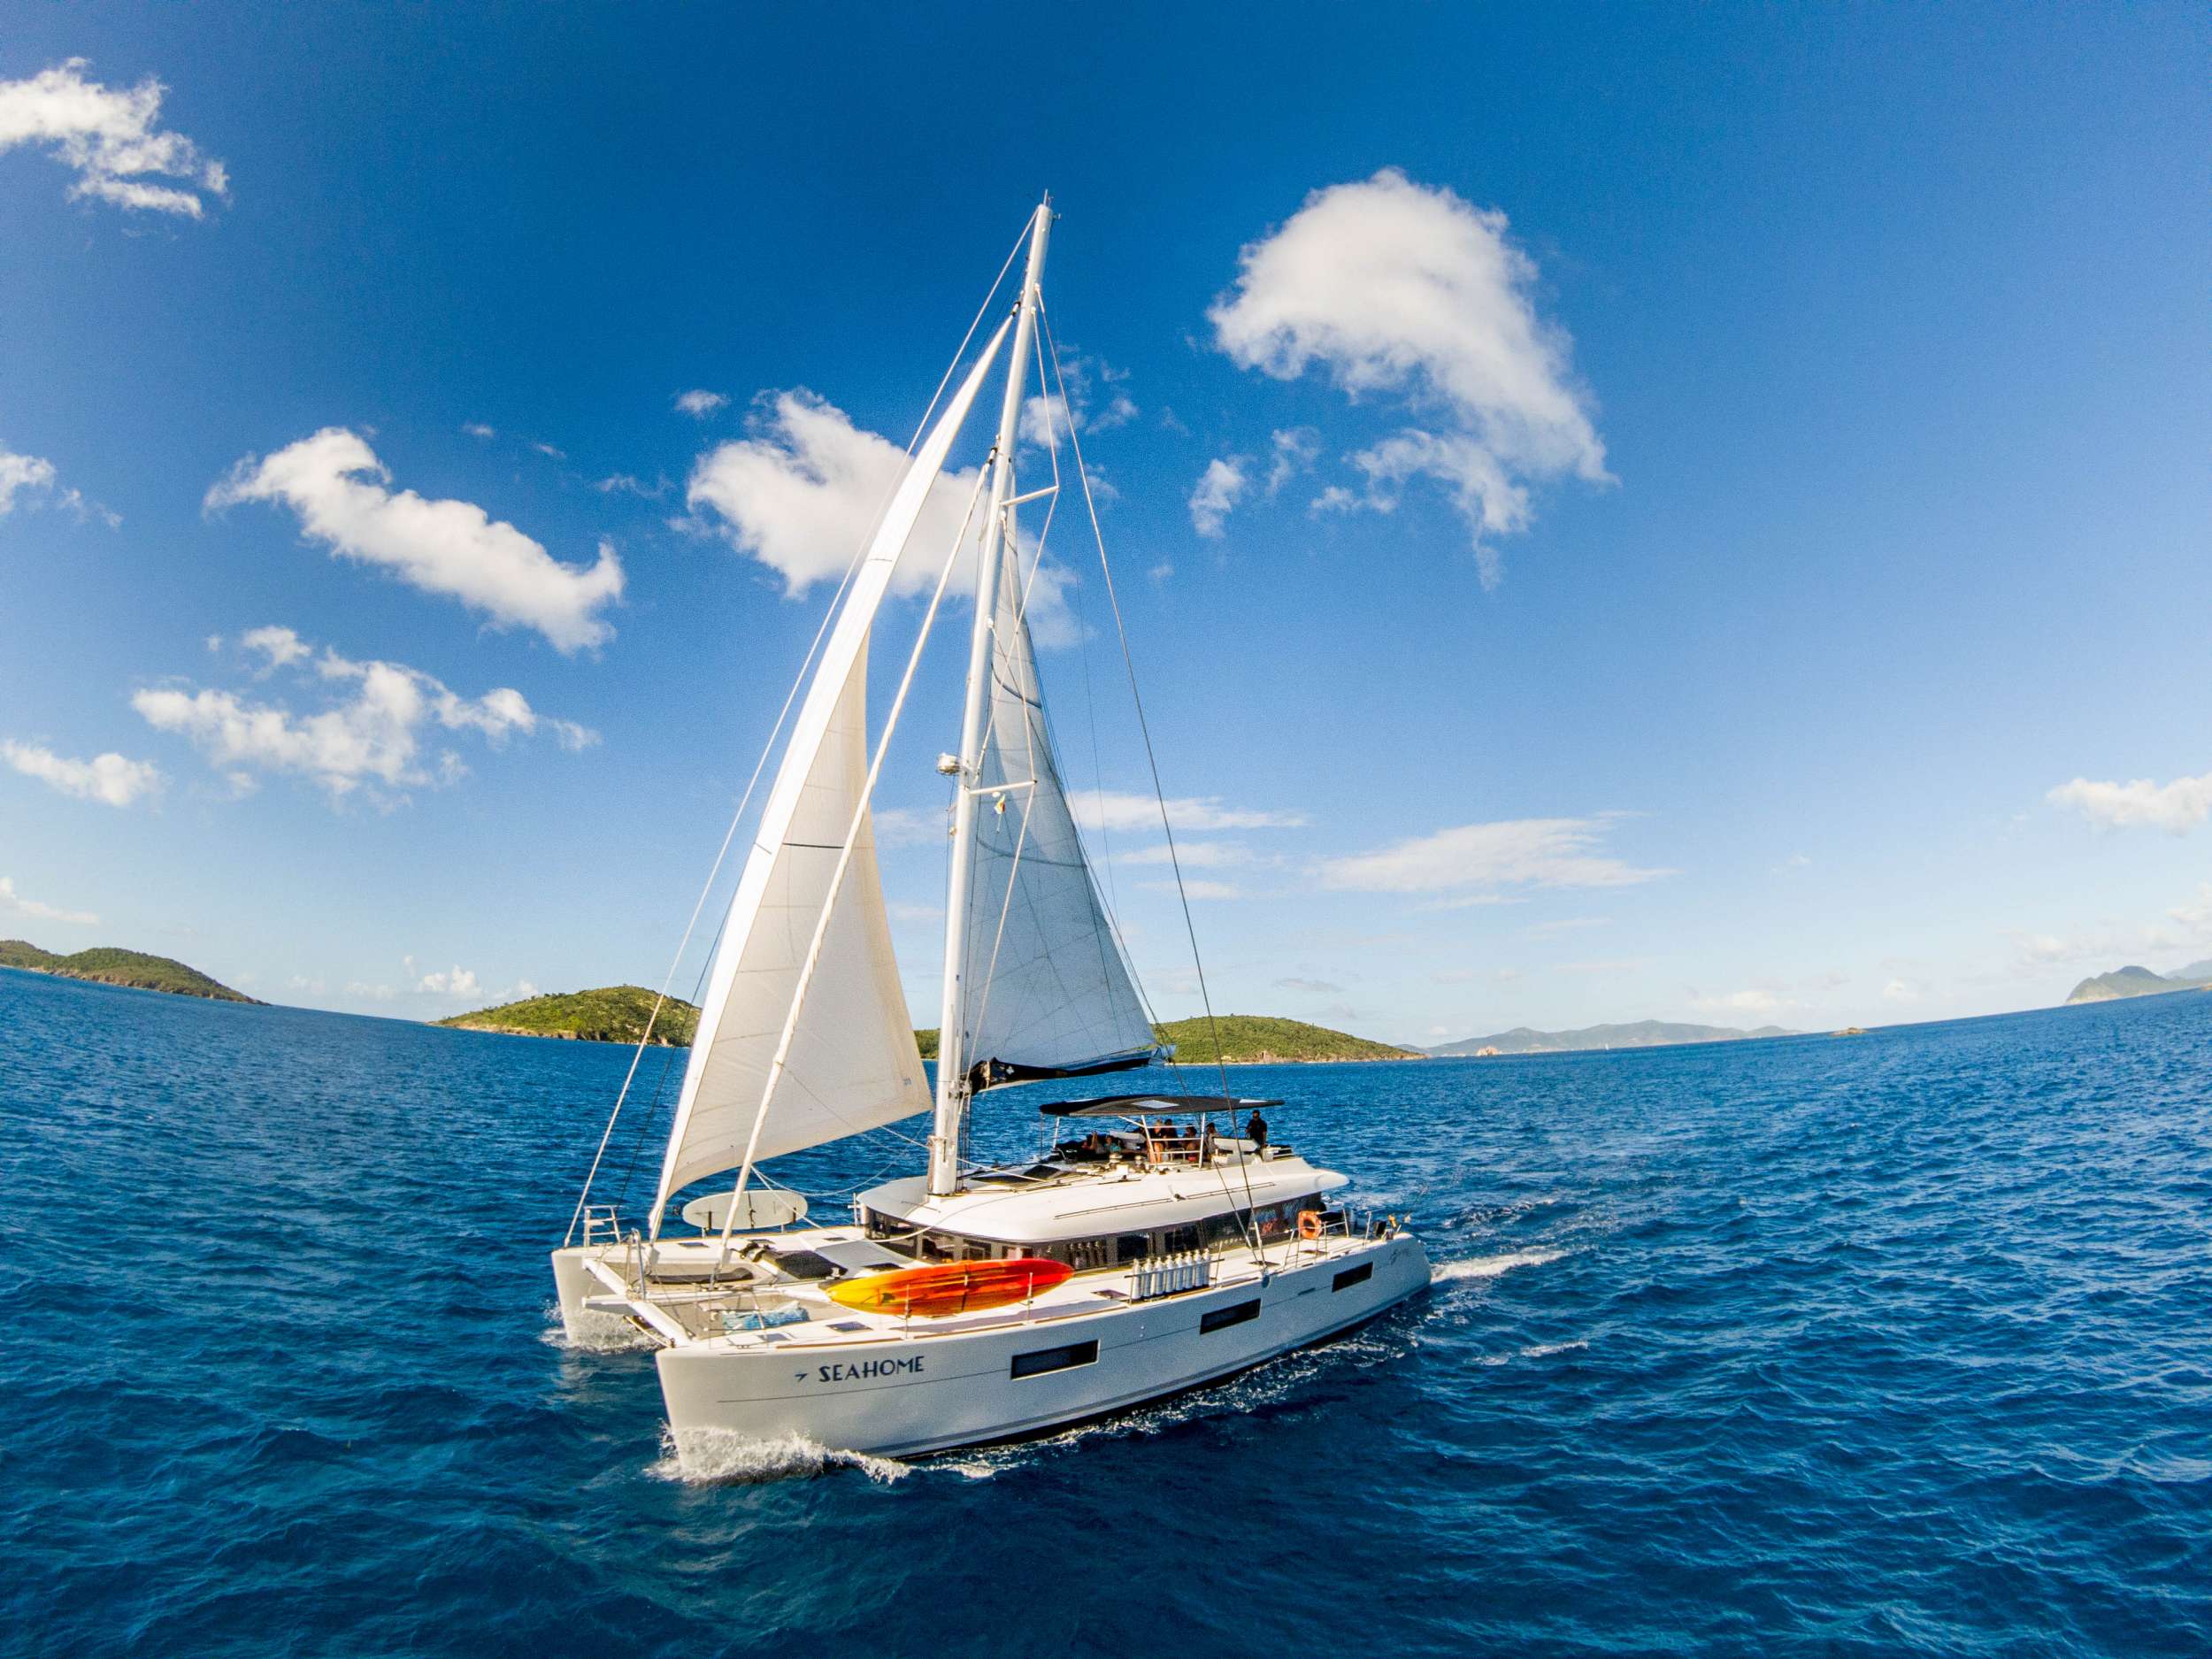 seahome - Yacht Charter Antigua & Boat hire in Caribbean 1